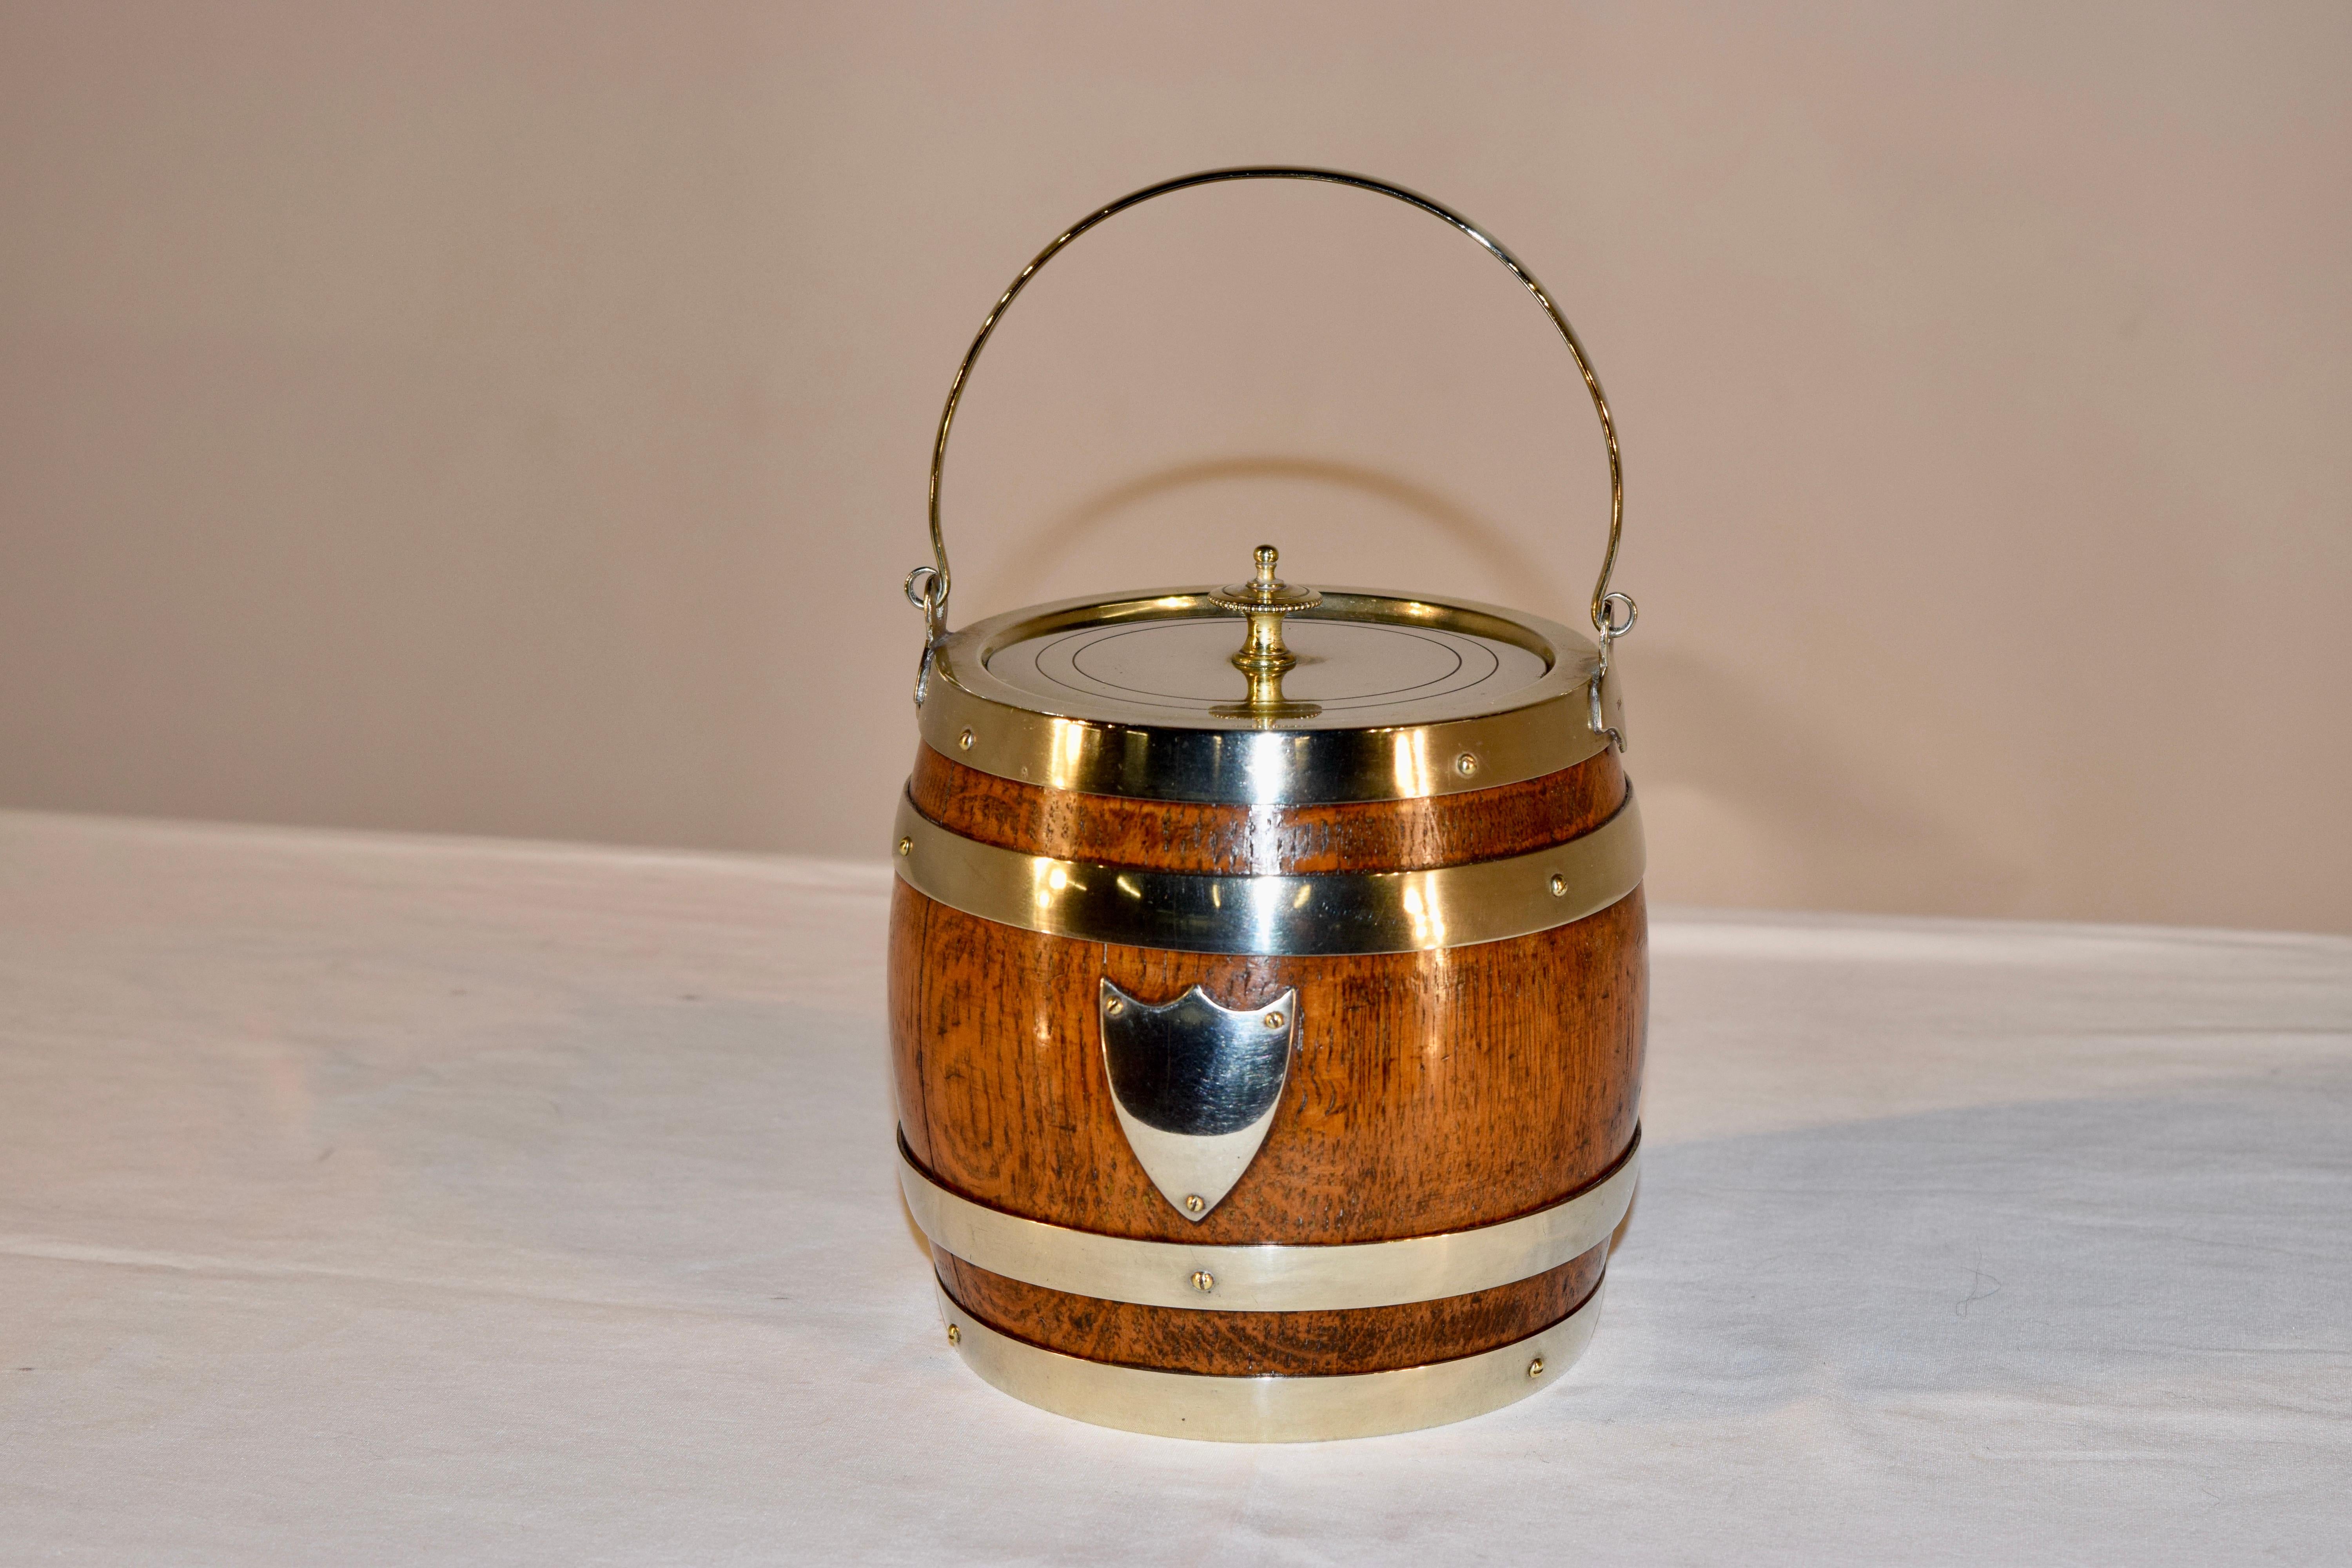 20th Century English Silver Plated Biscuit Barrel, circa 1900